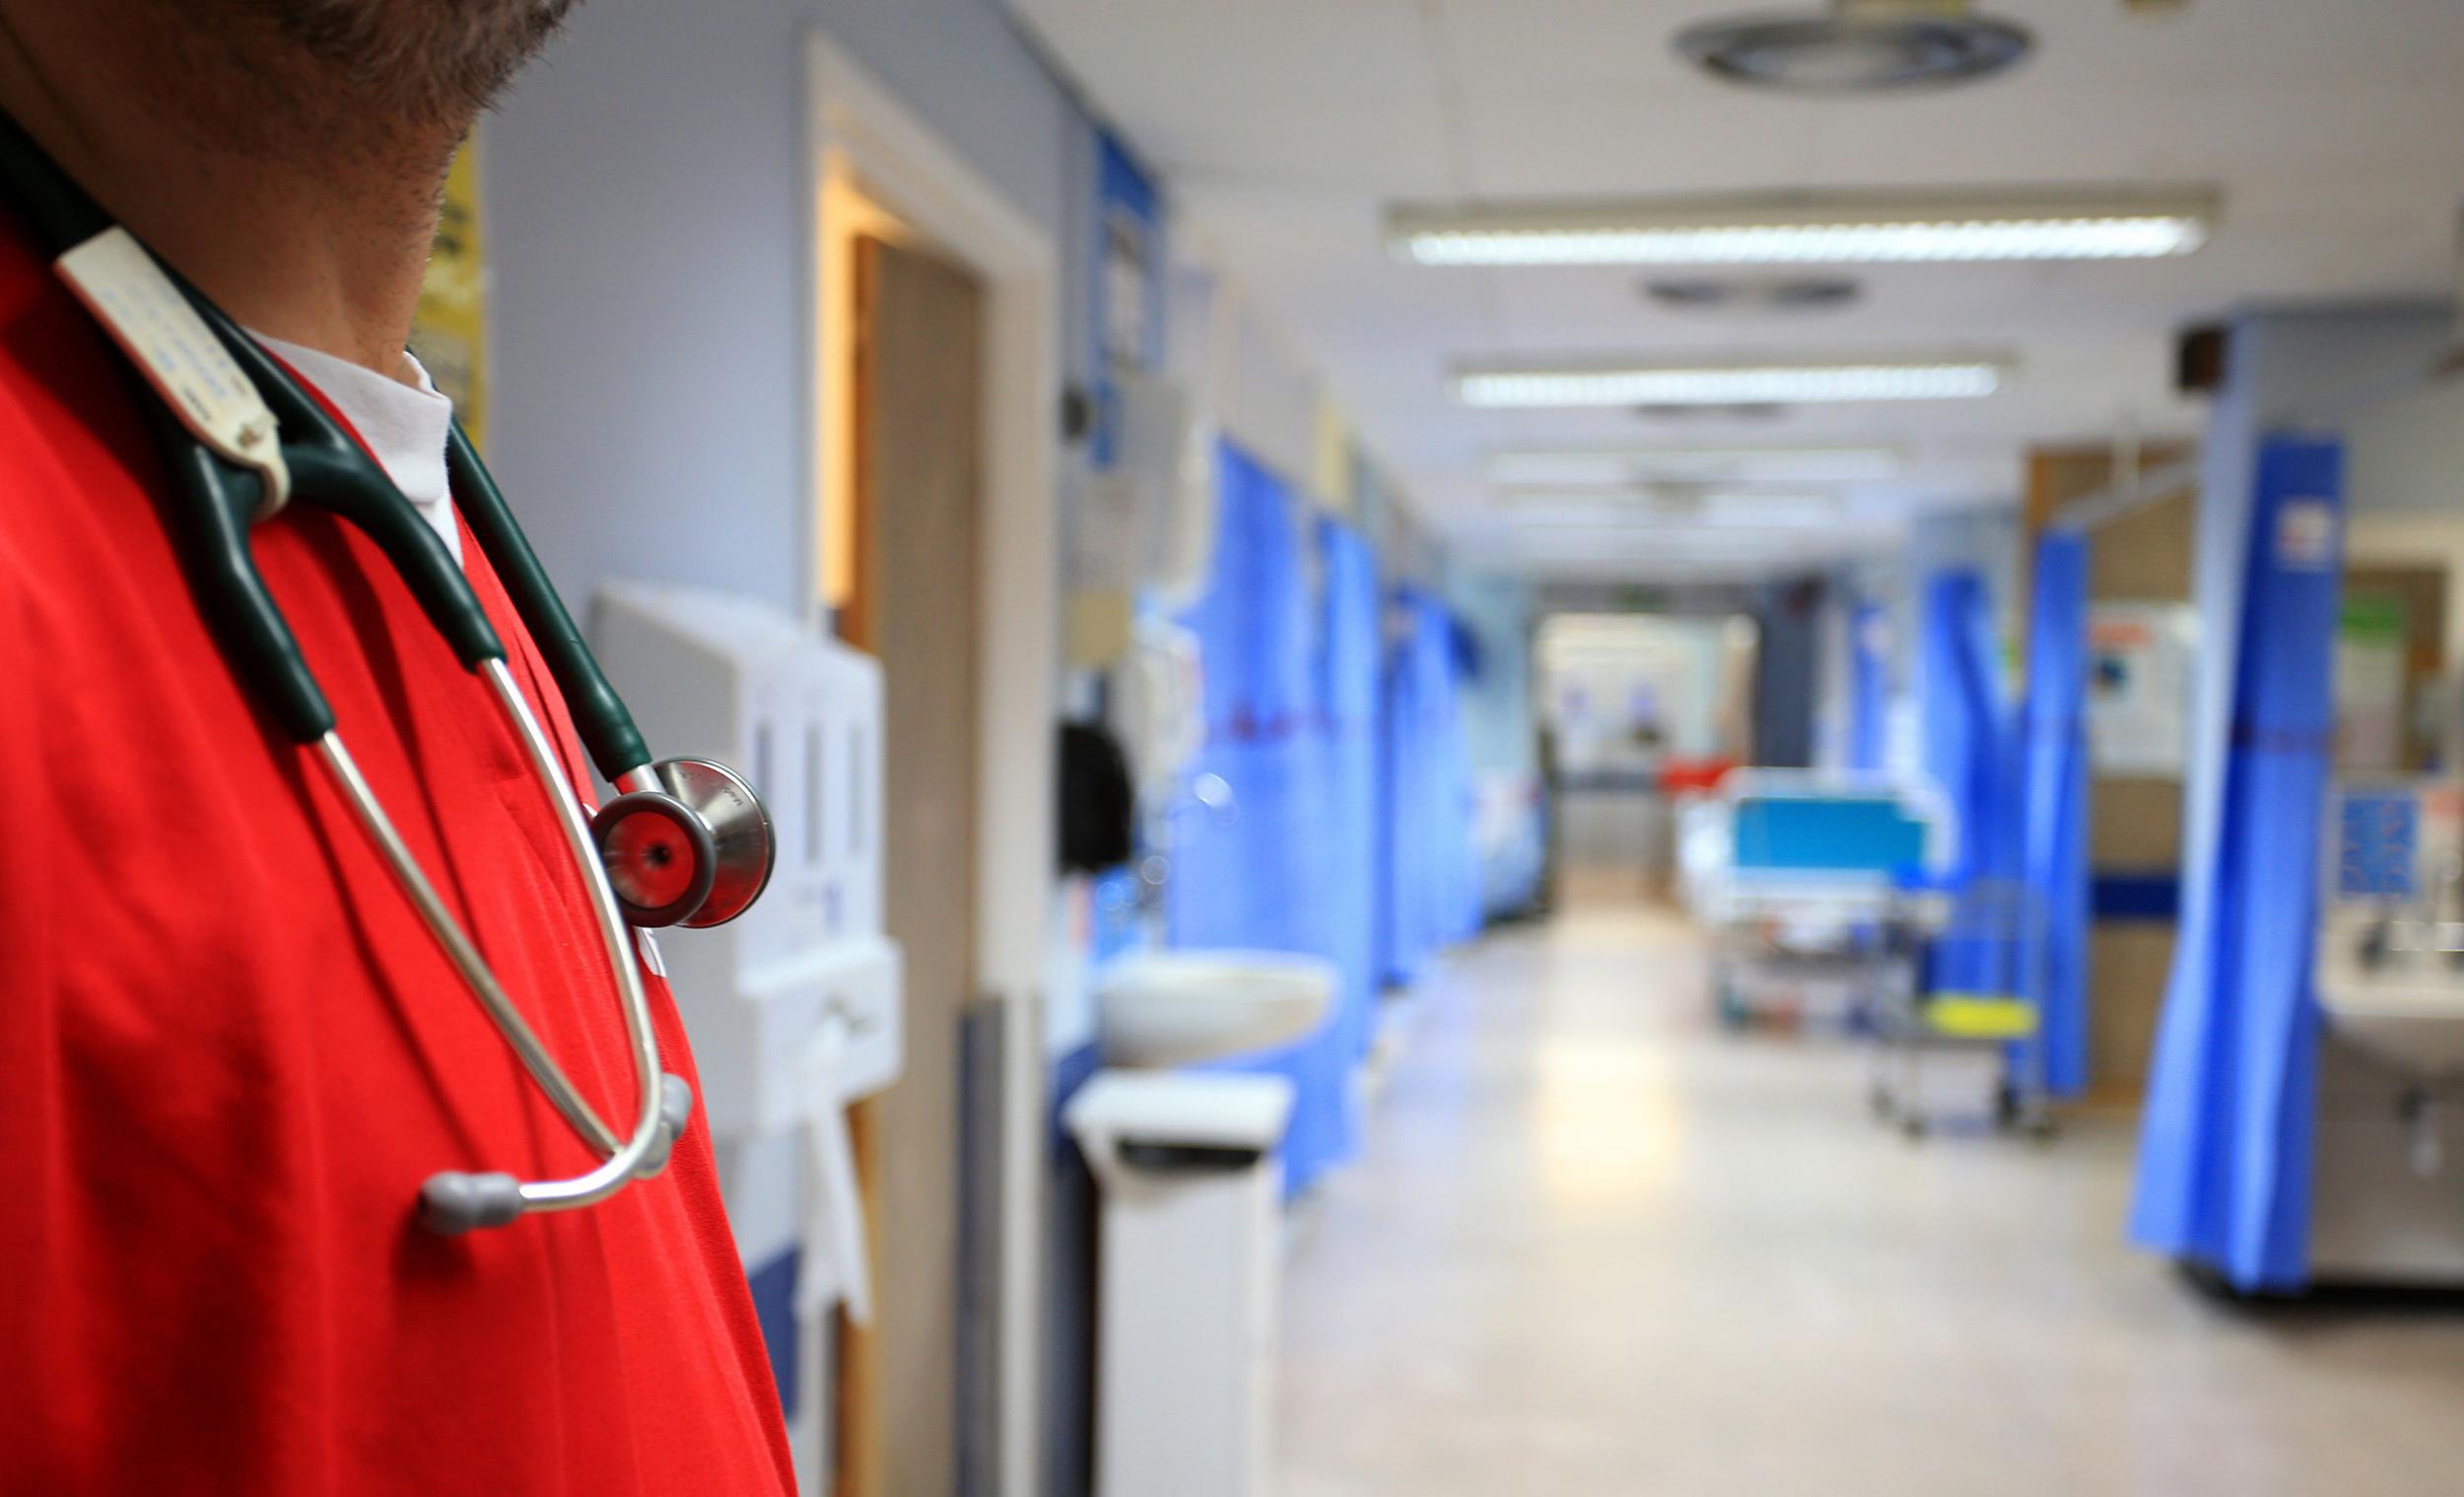 Doctors report gaps on ward rotas amid increasingly unsustainable funding